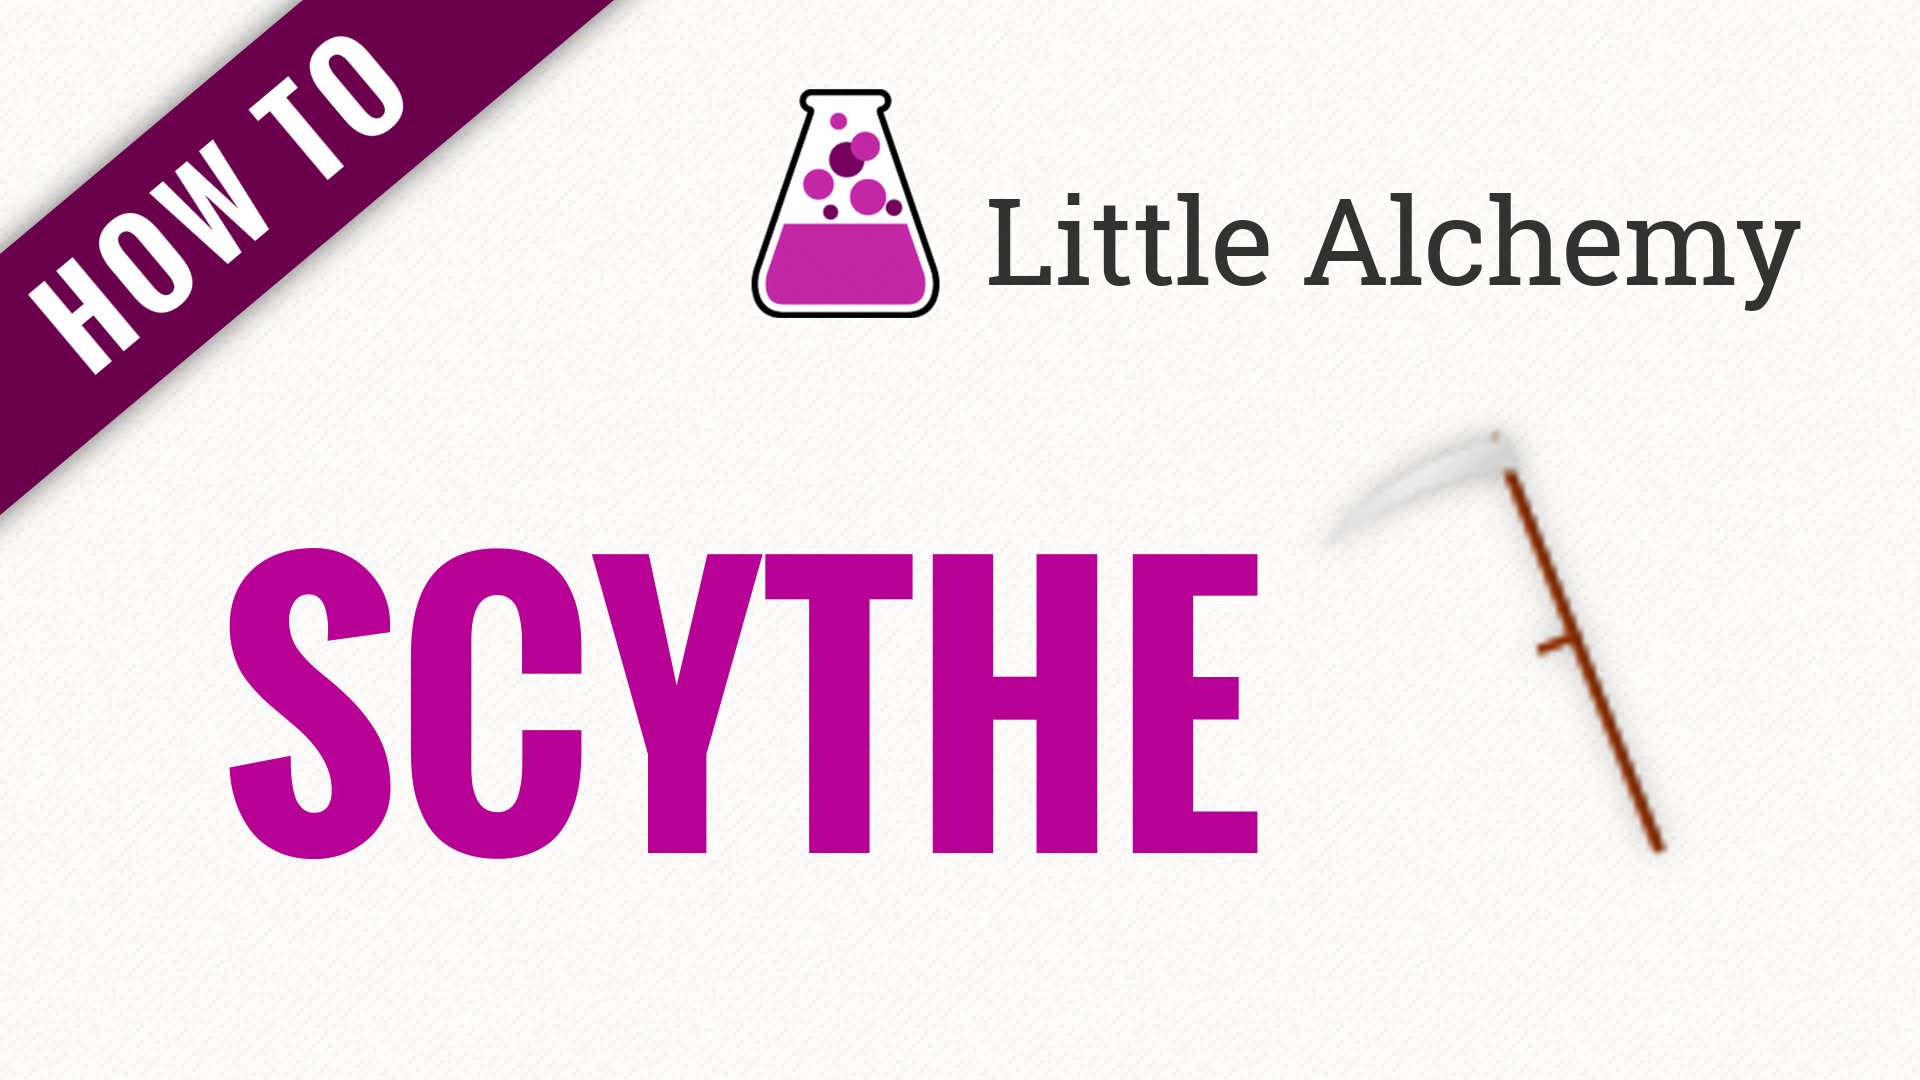 How To Make A Scythe In Little Alchemy